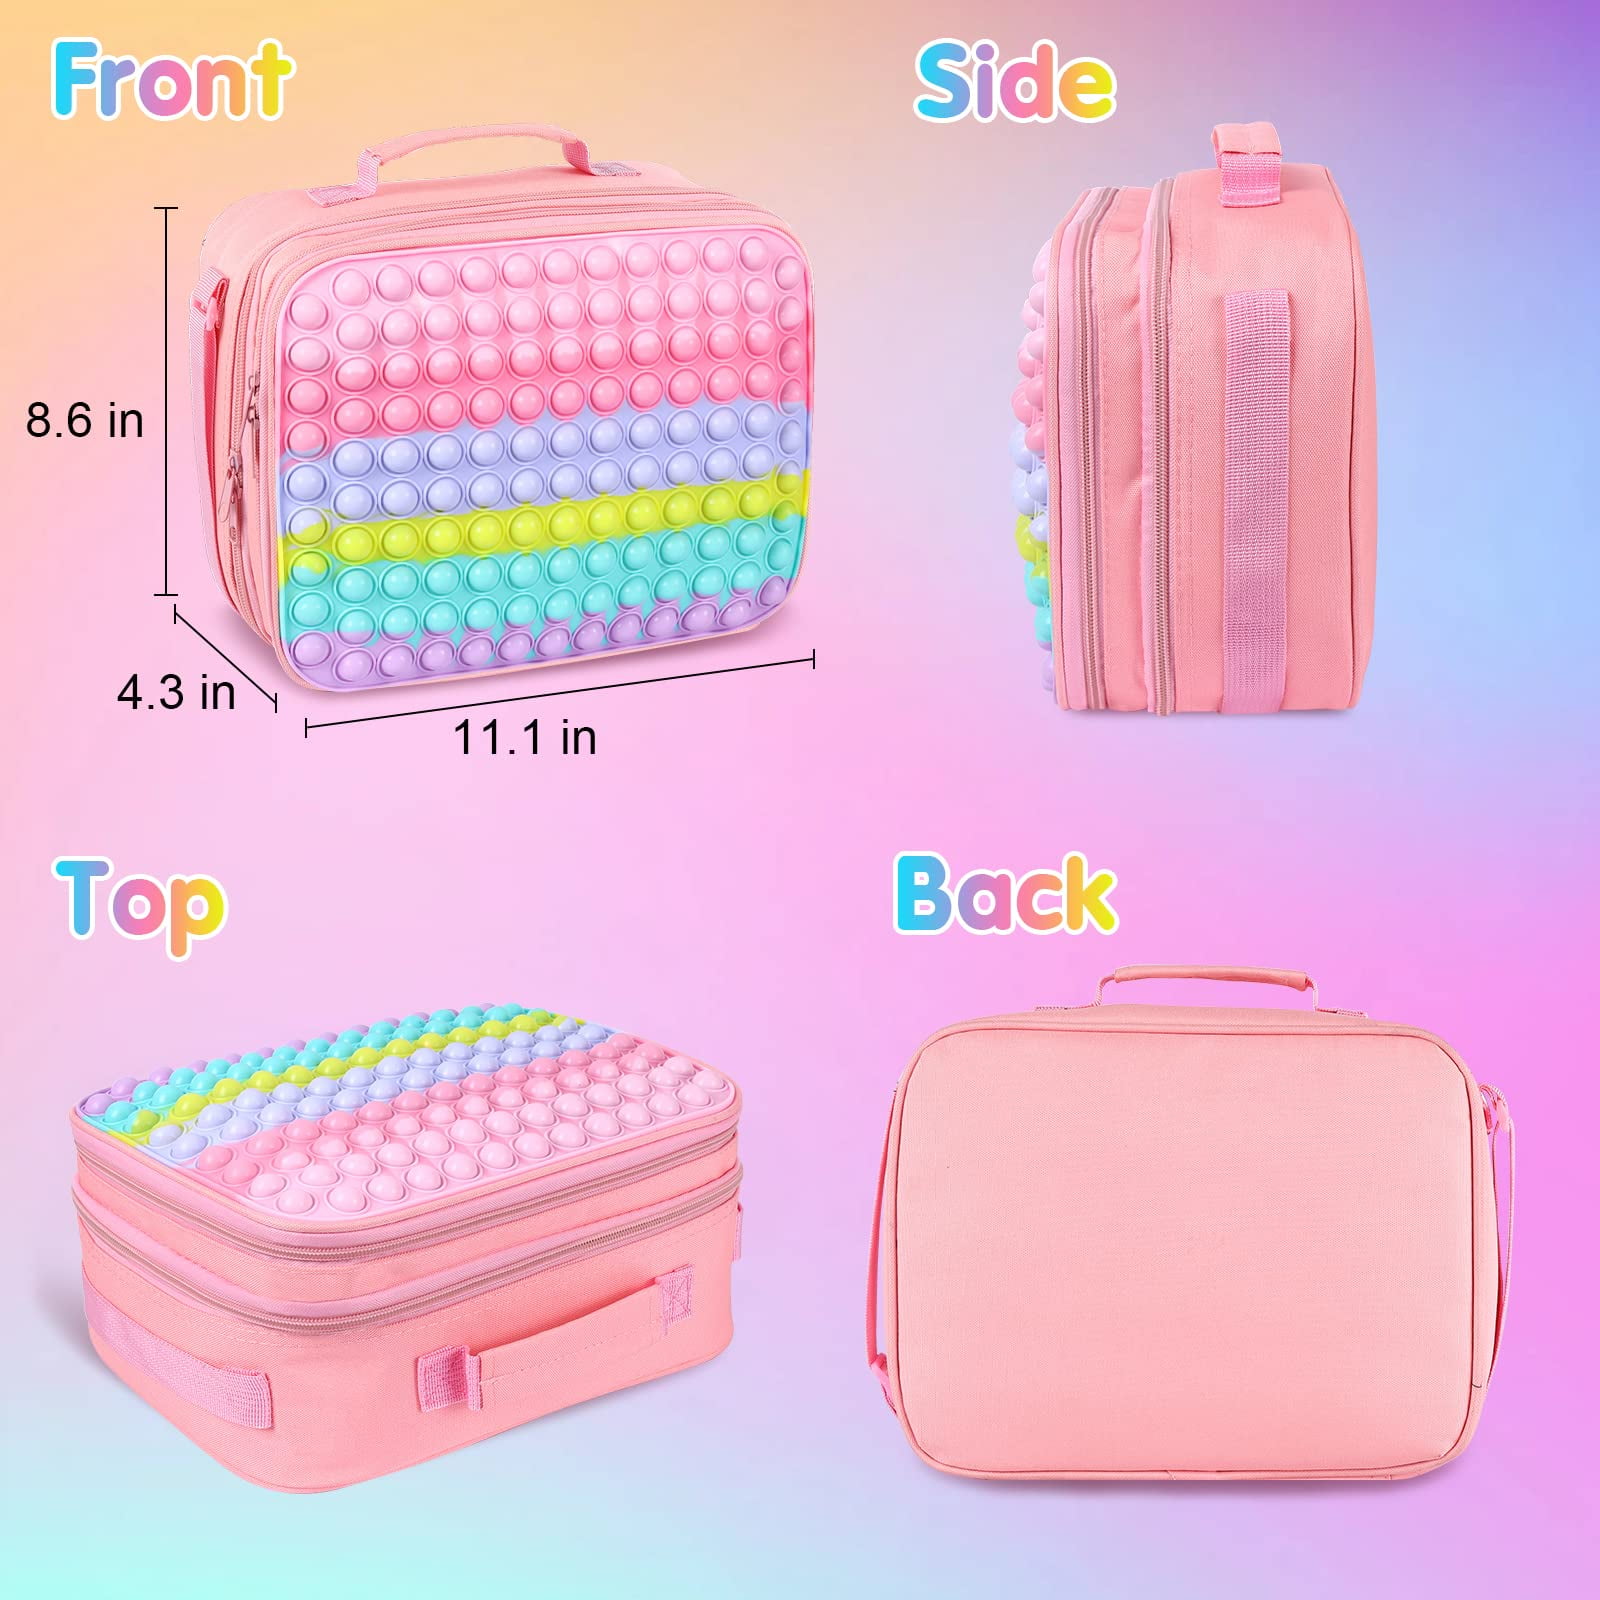 Pop Lunch Box for Girls Kids School Lunch Bag,Back to School Supplies Pop  Insulated Lunch Box Tote f…See more Pop Lunch Box for Girls Kids School